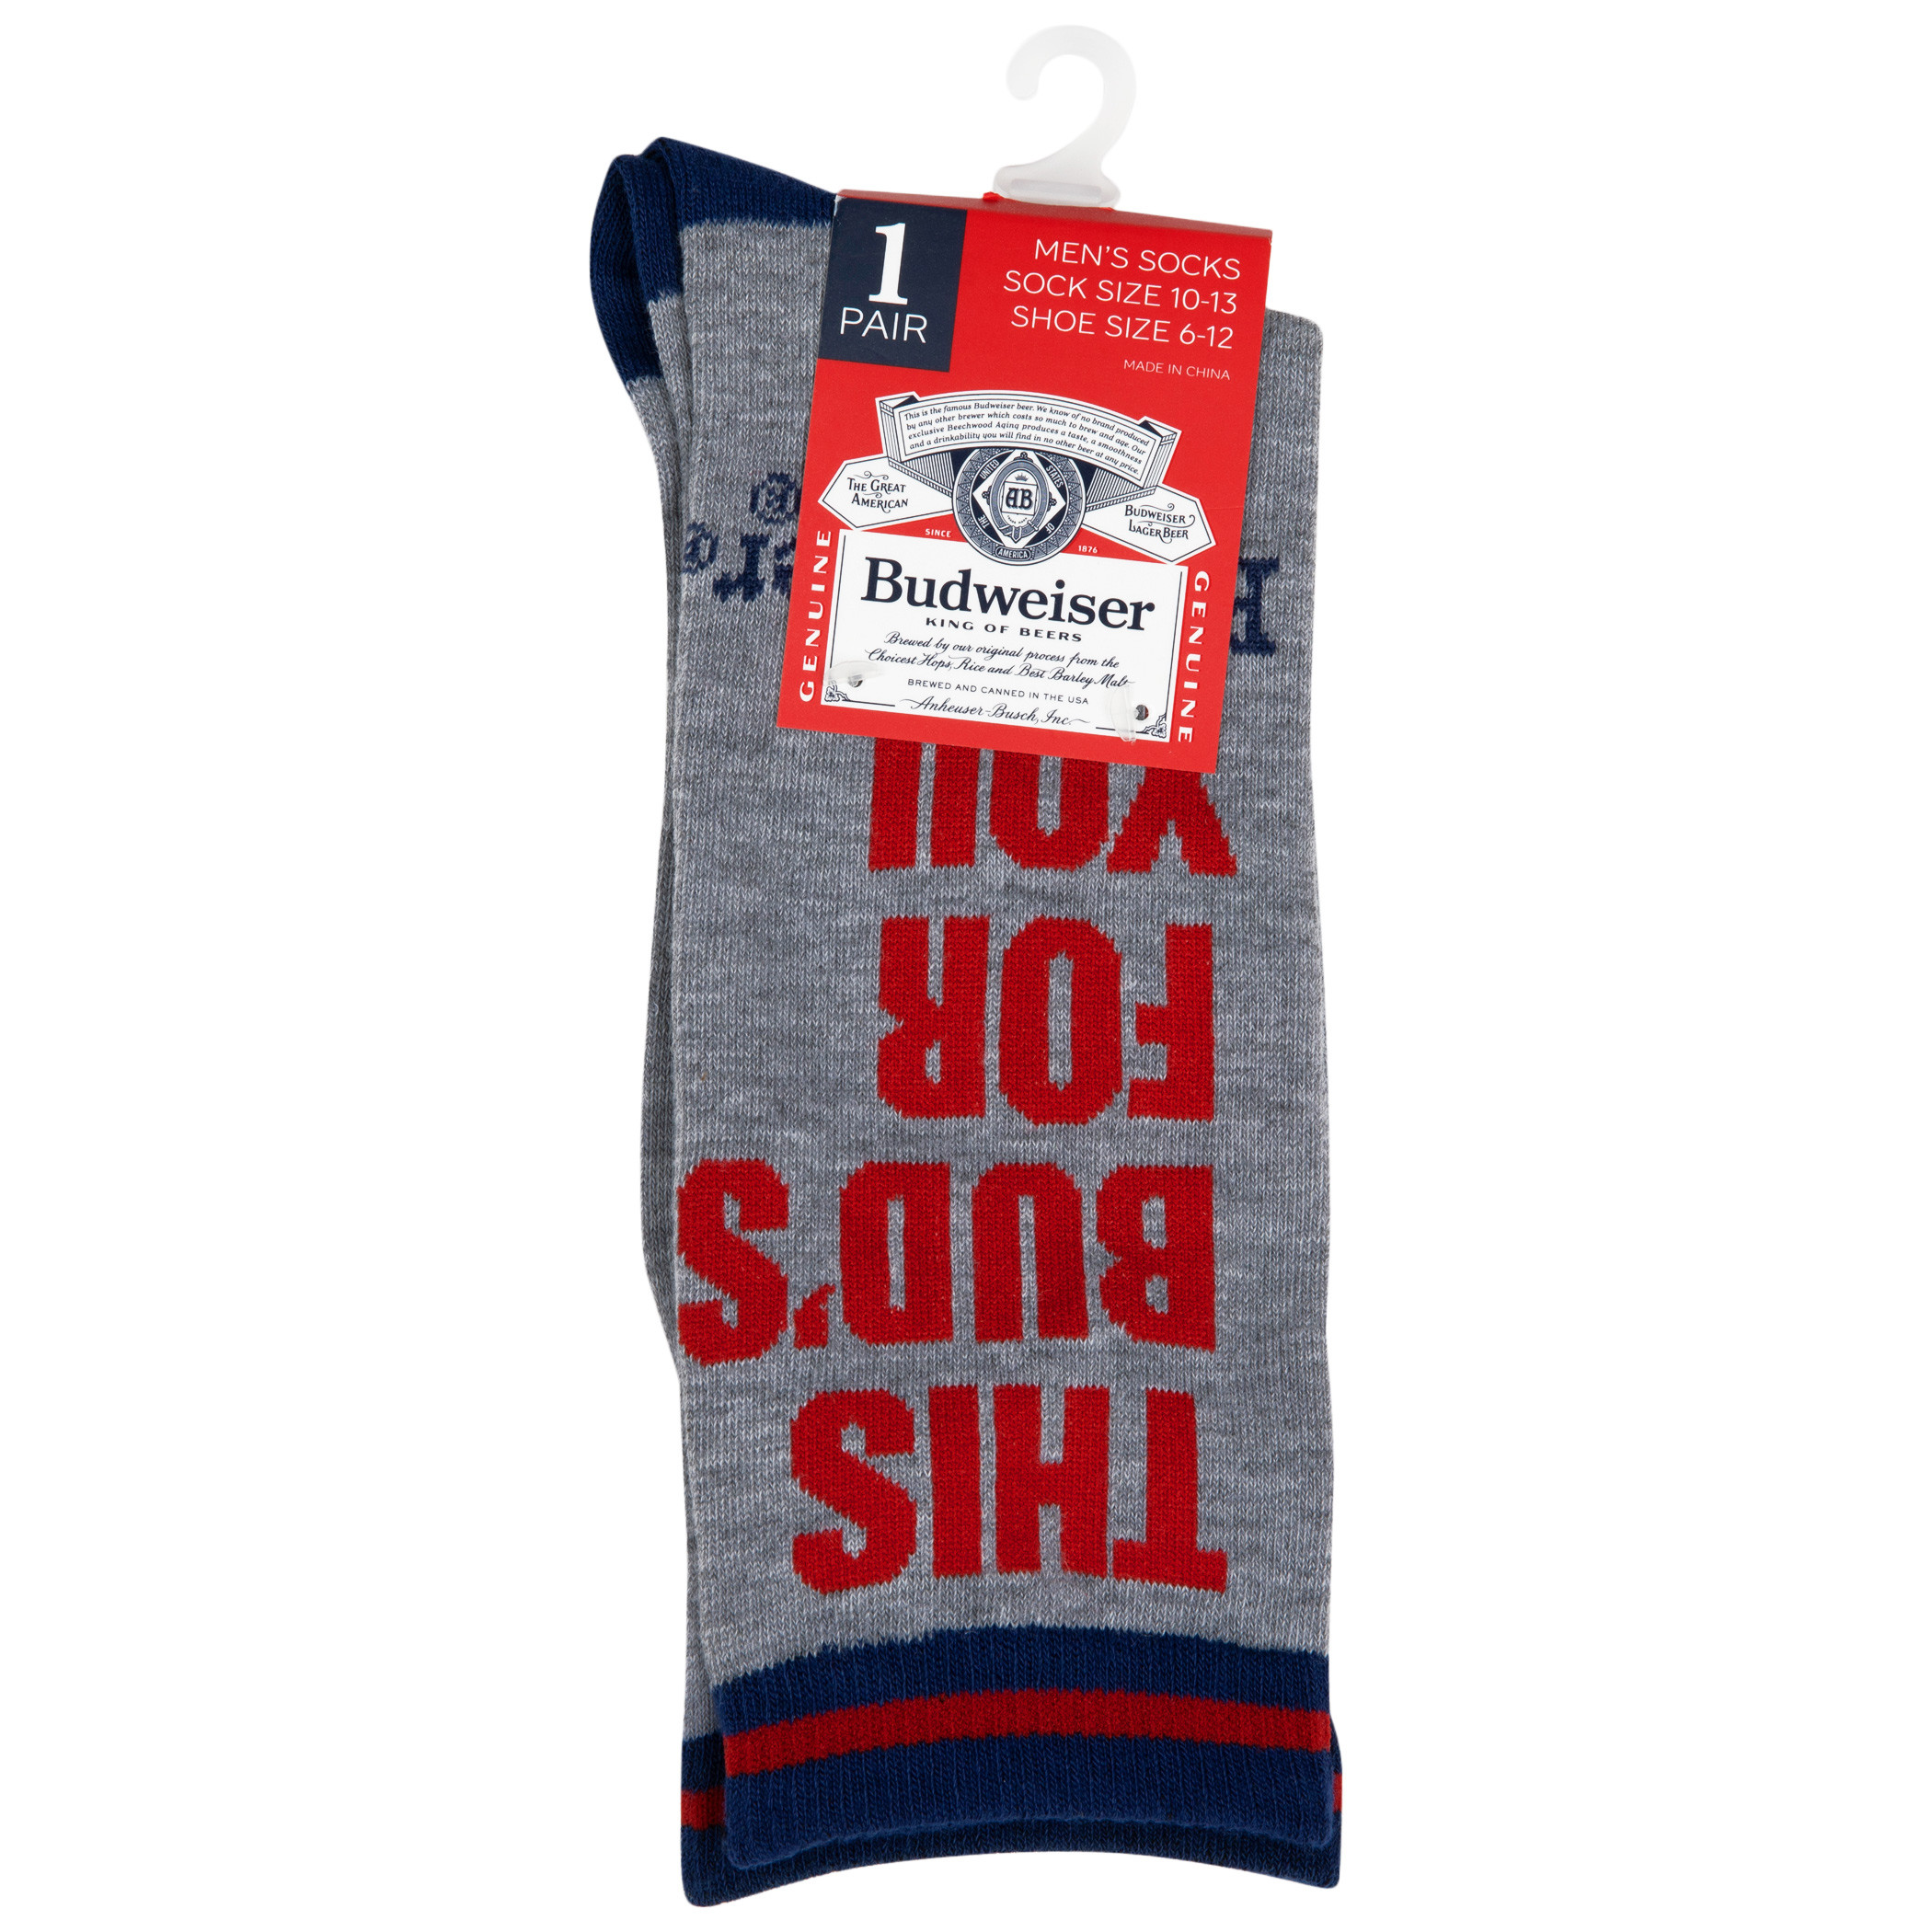 Budweiser This Bud's For You Crew Socks